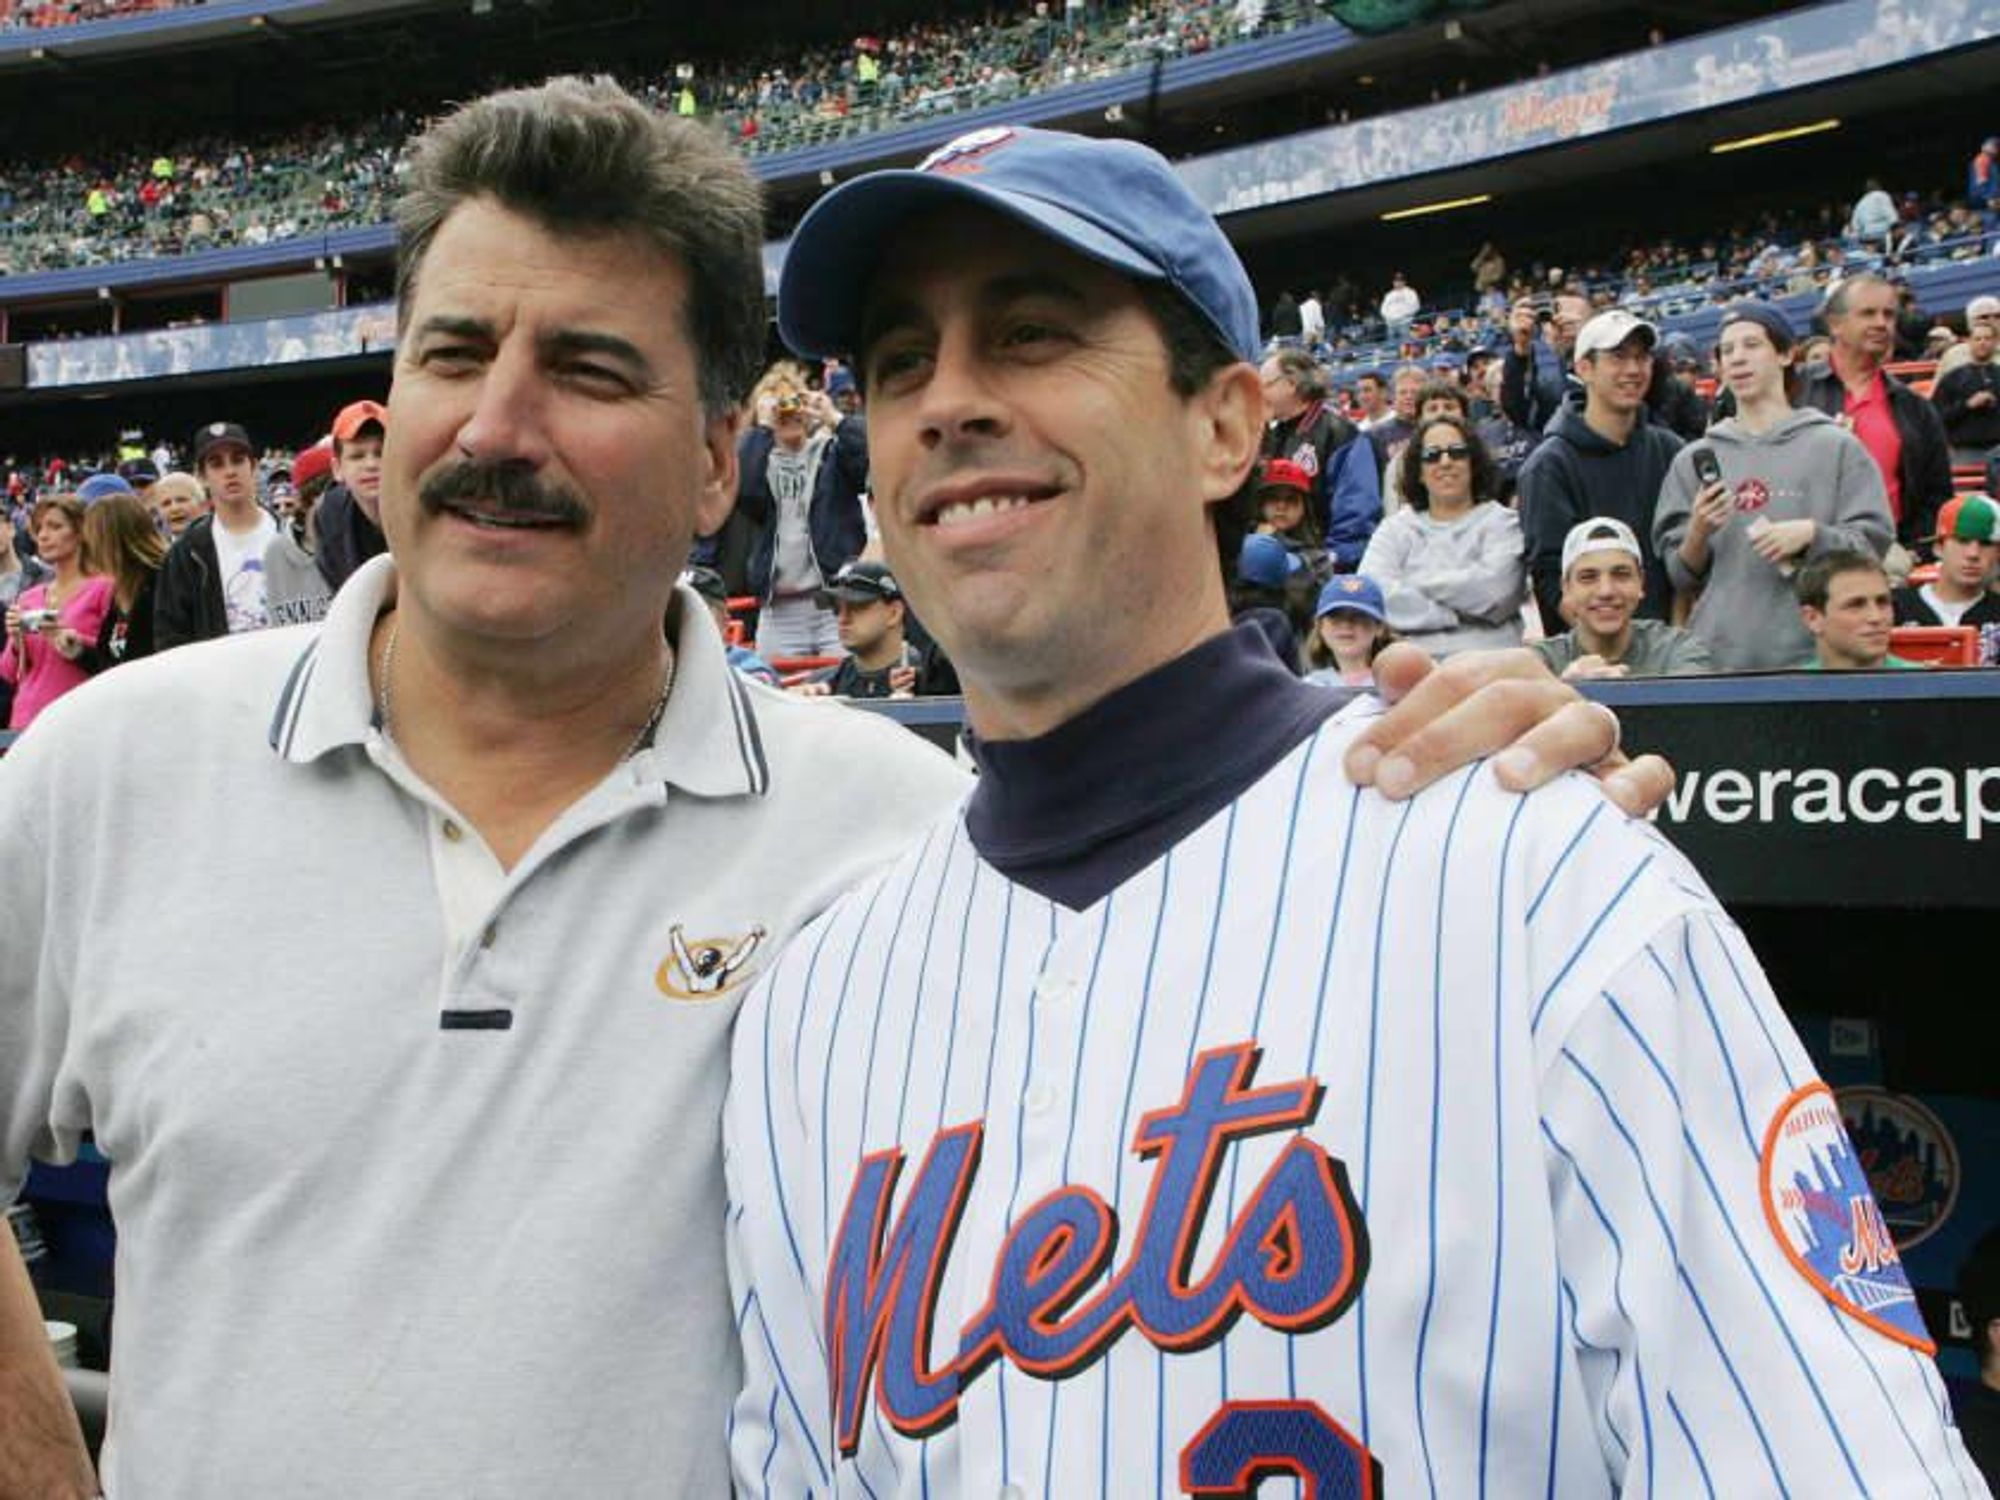 Keith Hernandez jersey: NY Mets legend on number retired; Old Timers Day?